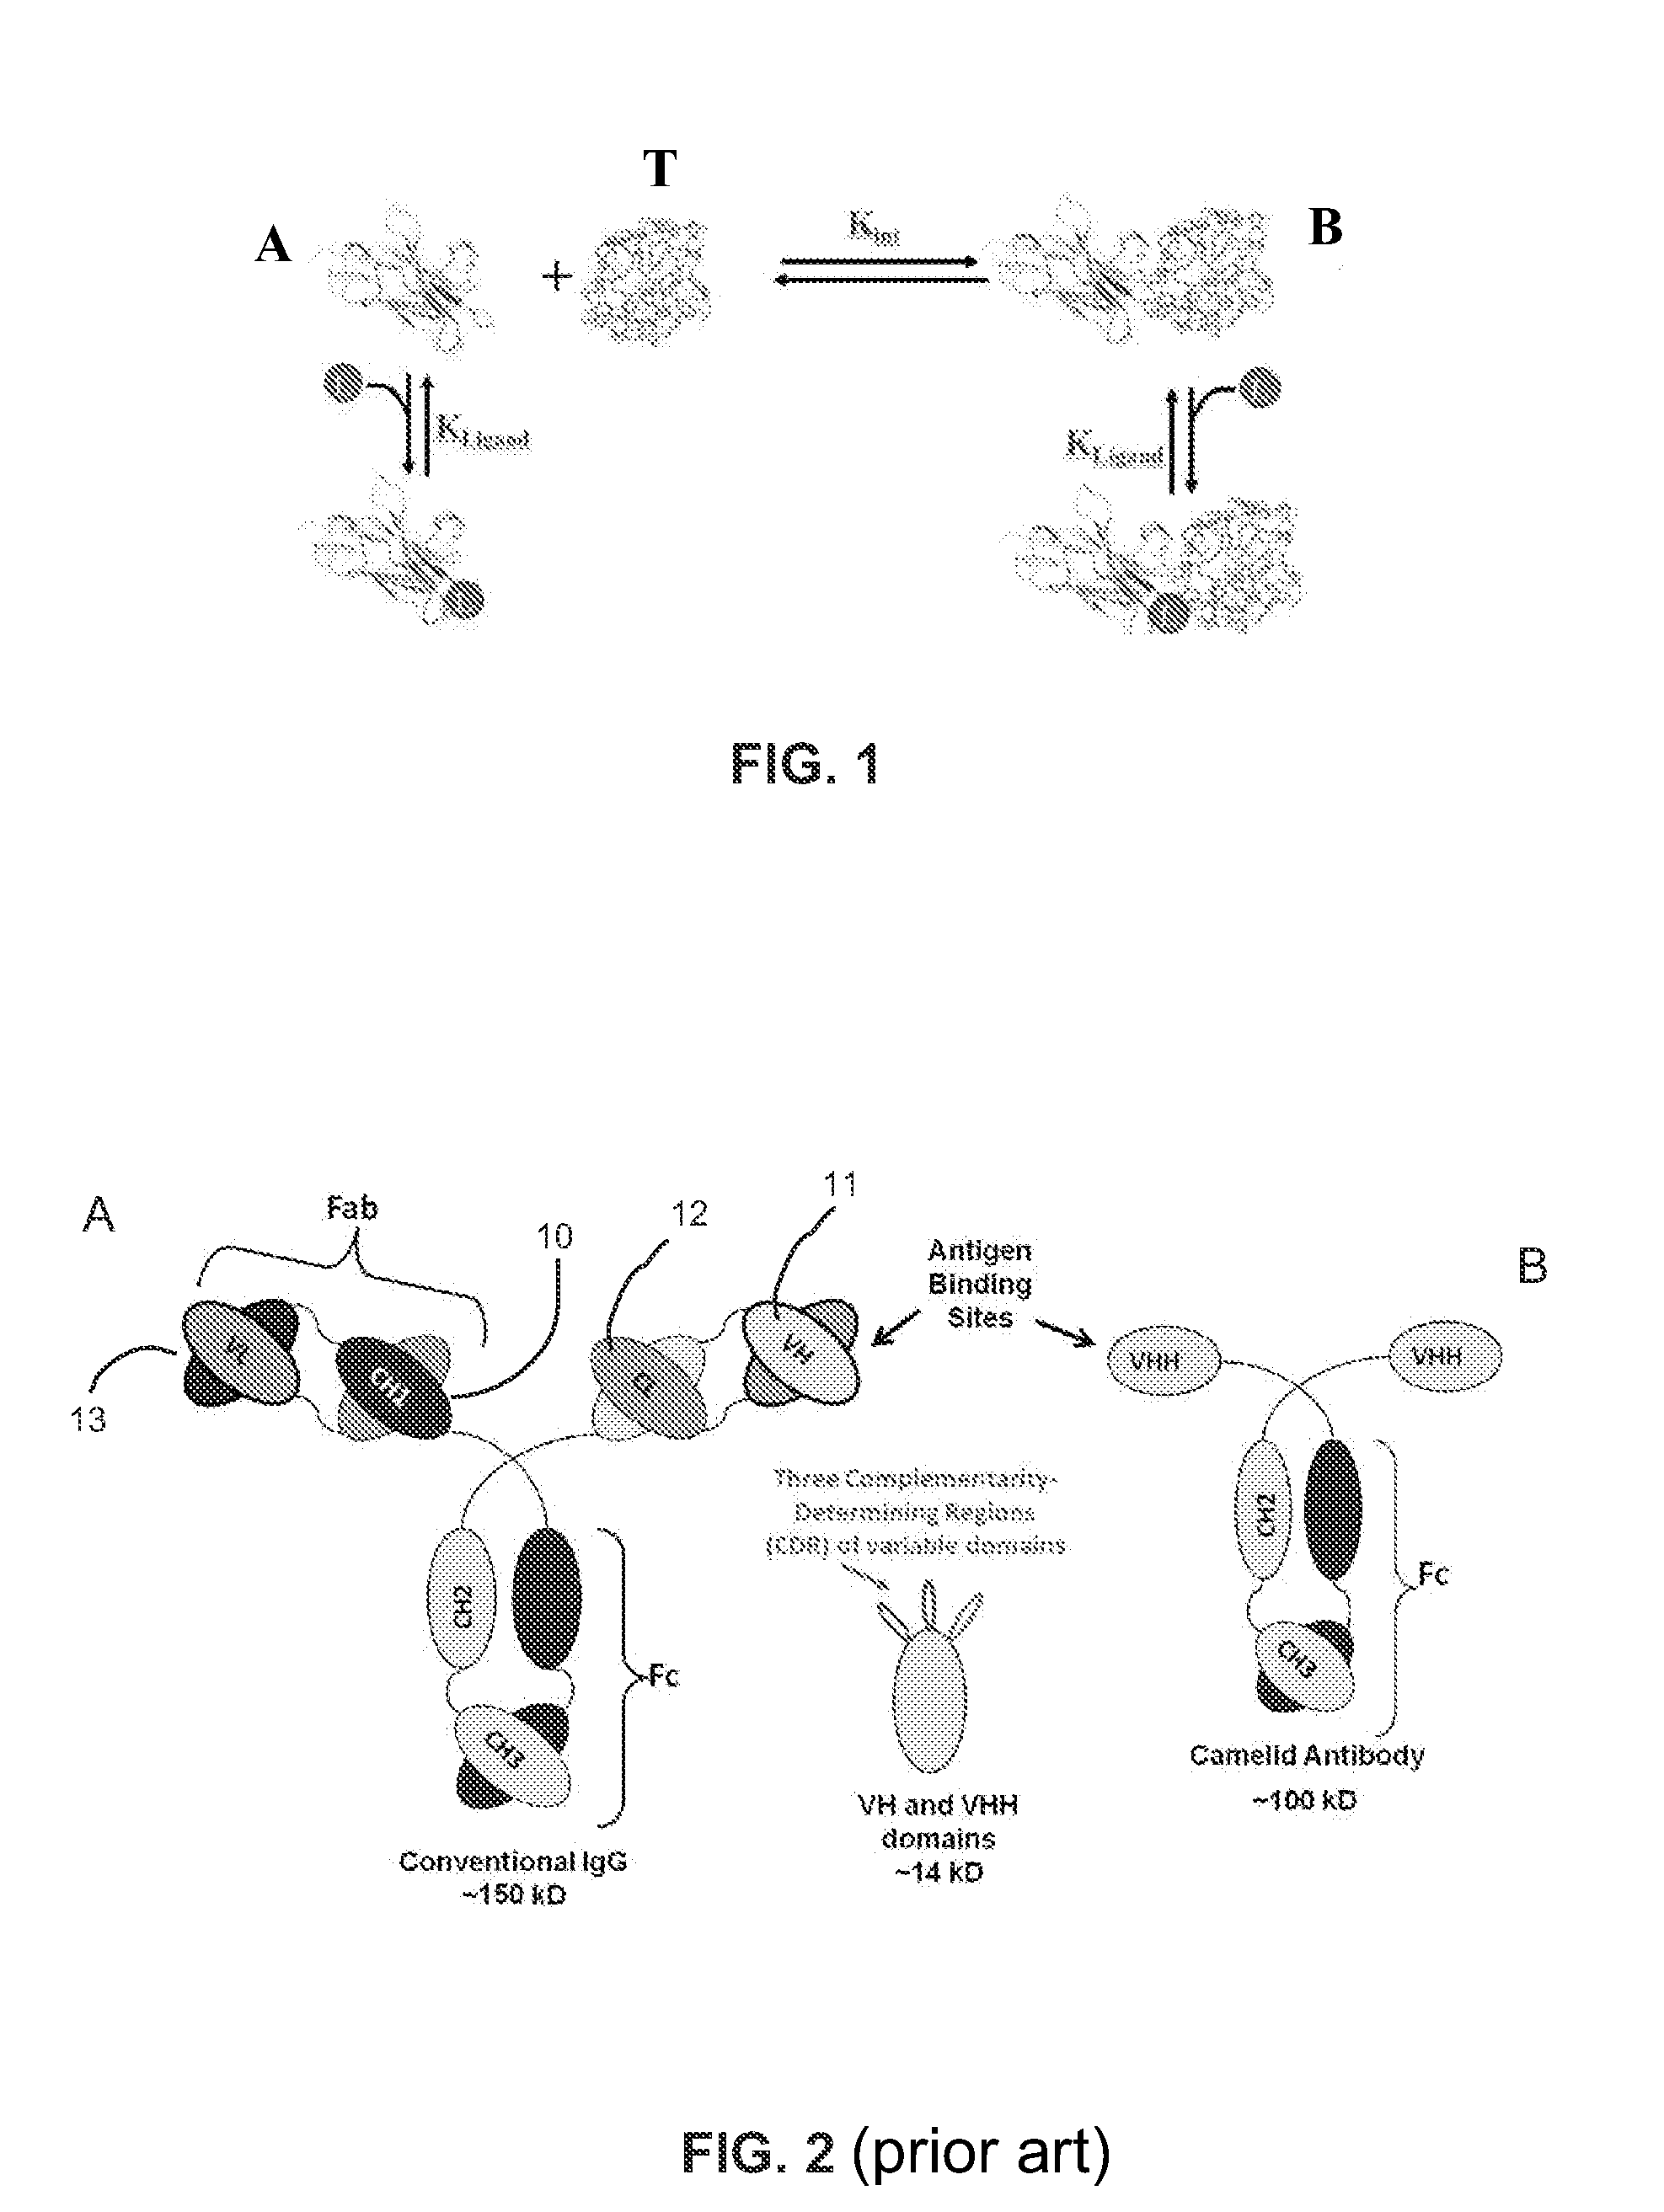 Library-based methods and compositions for introducing molecular switch functionality into protein affinity reagents